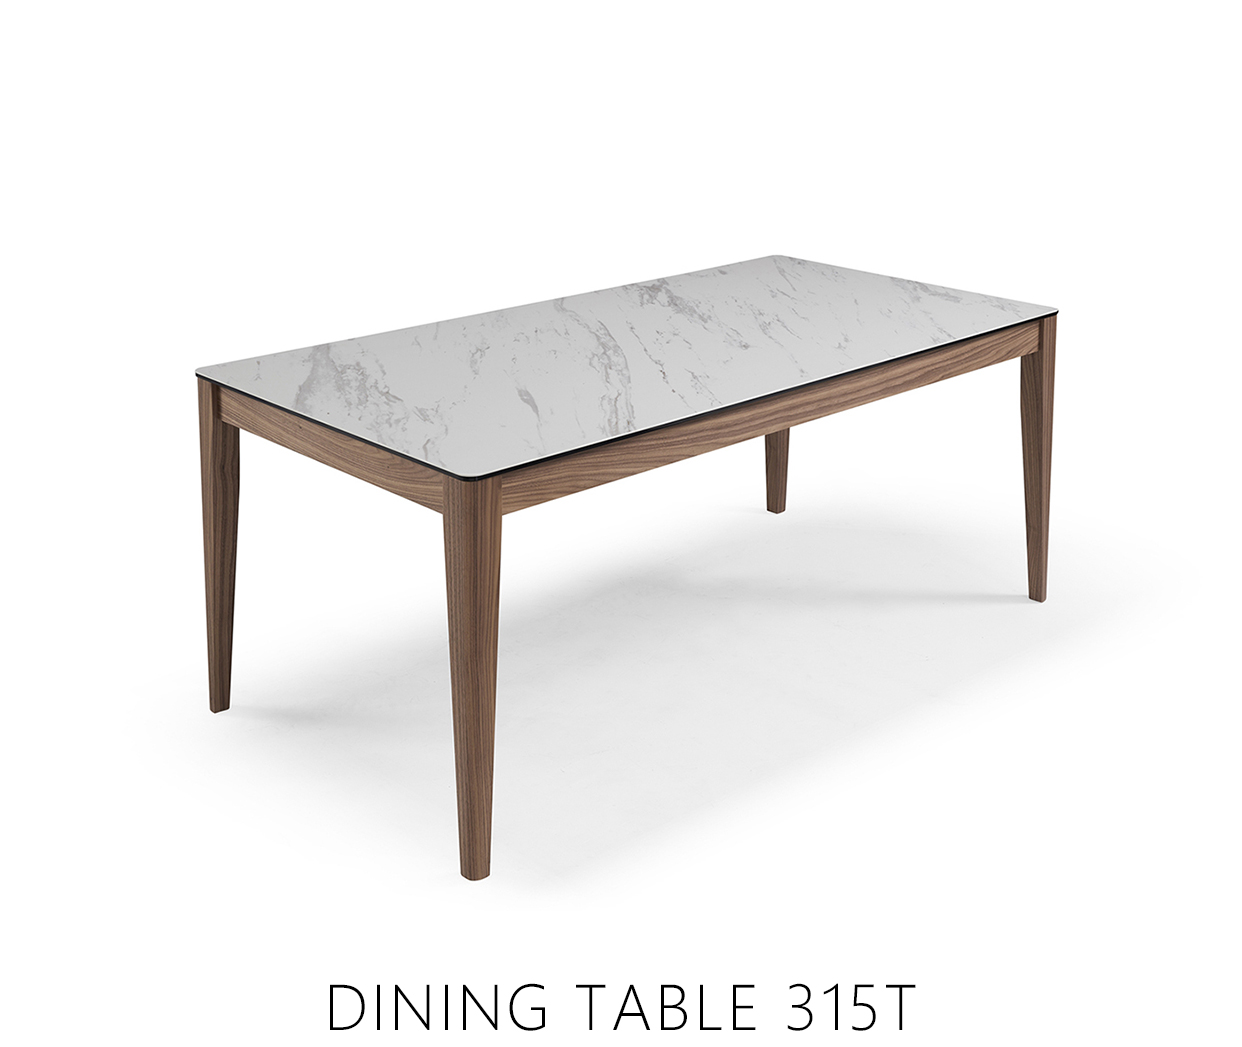 DINING TABLE 315T